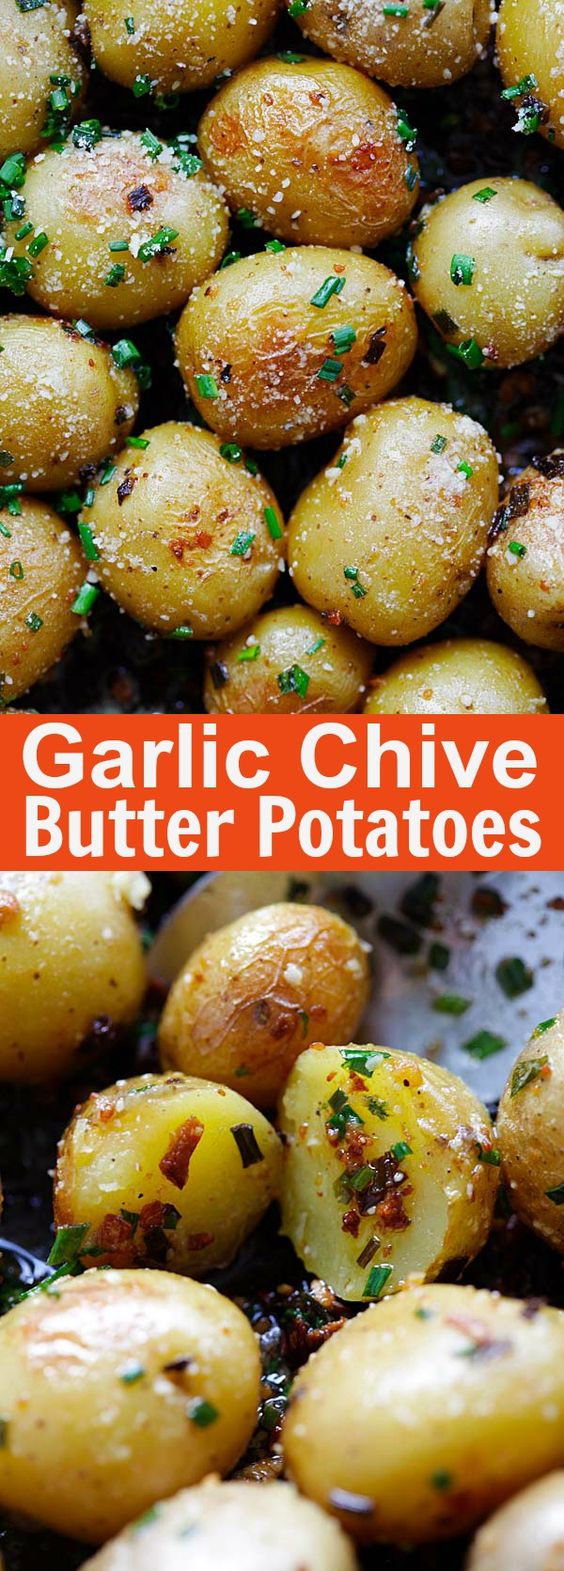 Garlic Chive Butter Roasted Potatoes - roasted baby potatoes with garlic, chives, butter and Parmesan cheese. The only roasted potatoes recipe you'll need | rasamalaysia.com